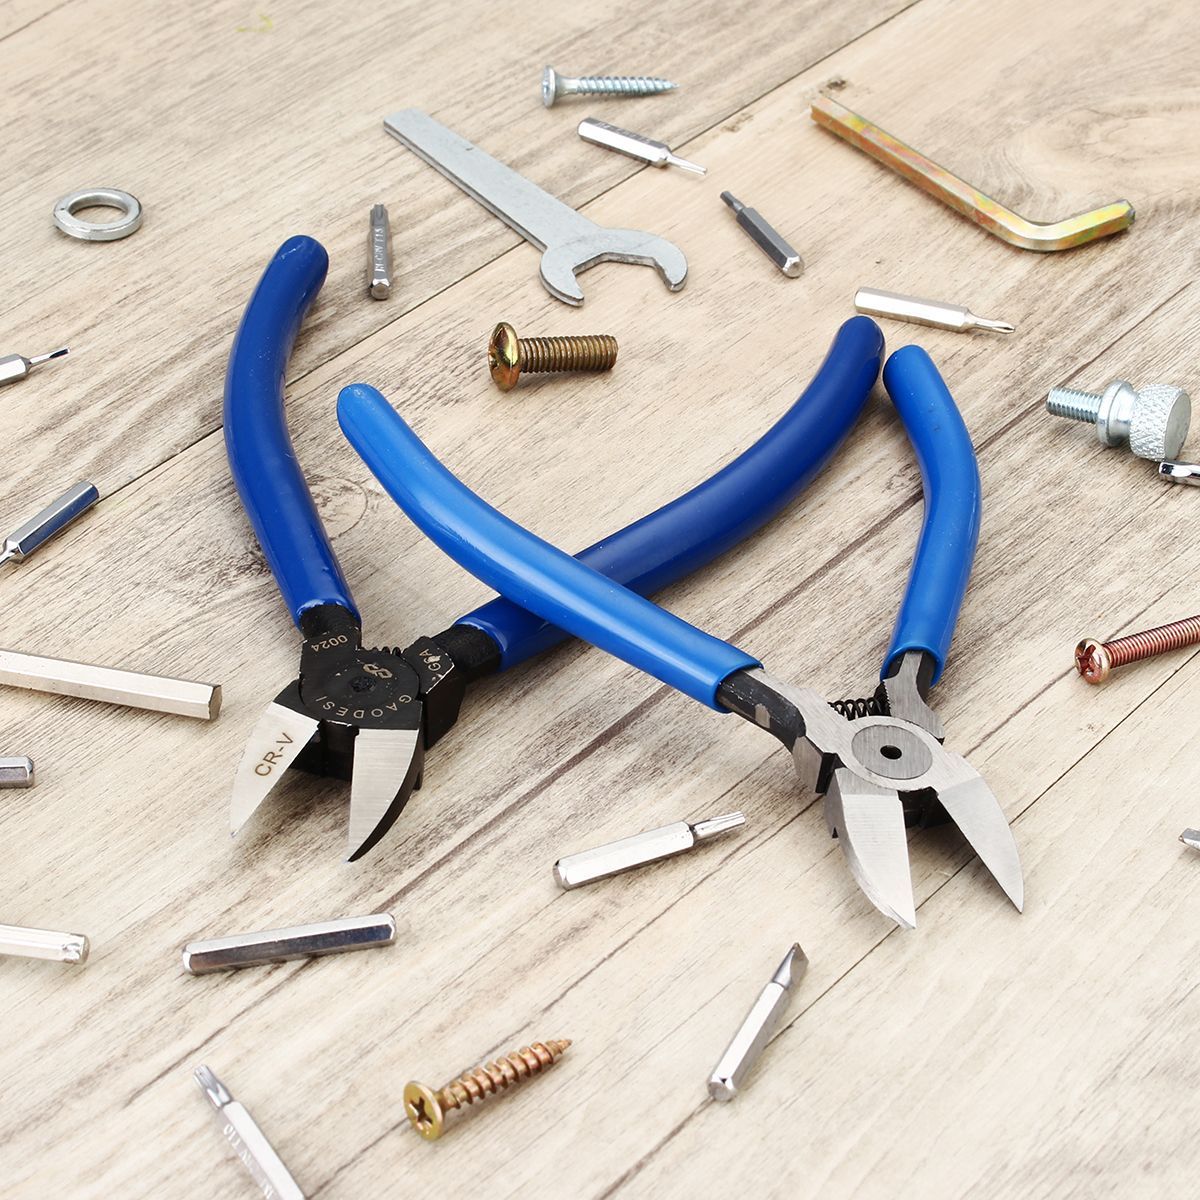 Wire-Cutter-Pliers-Small-Diagonal-Flush-Wire-Cutters-Side-Cutter-Pliers-Diagonal-Flush-Cutters-1368545